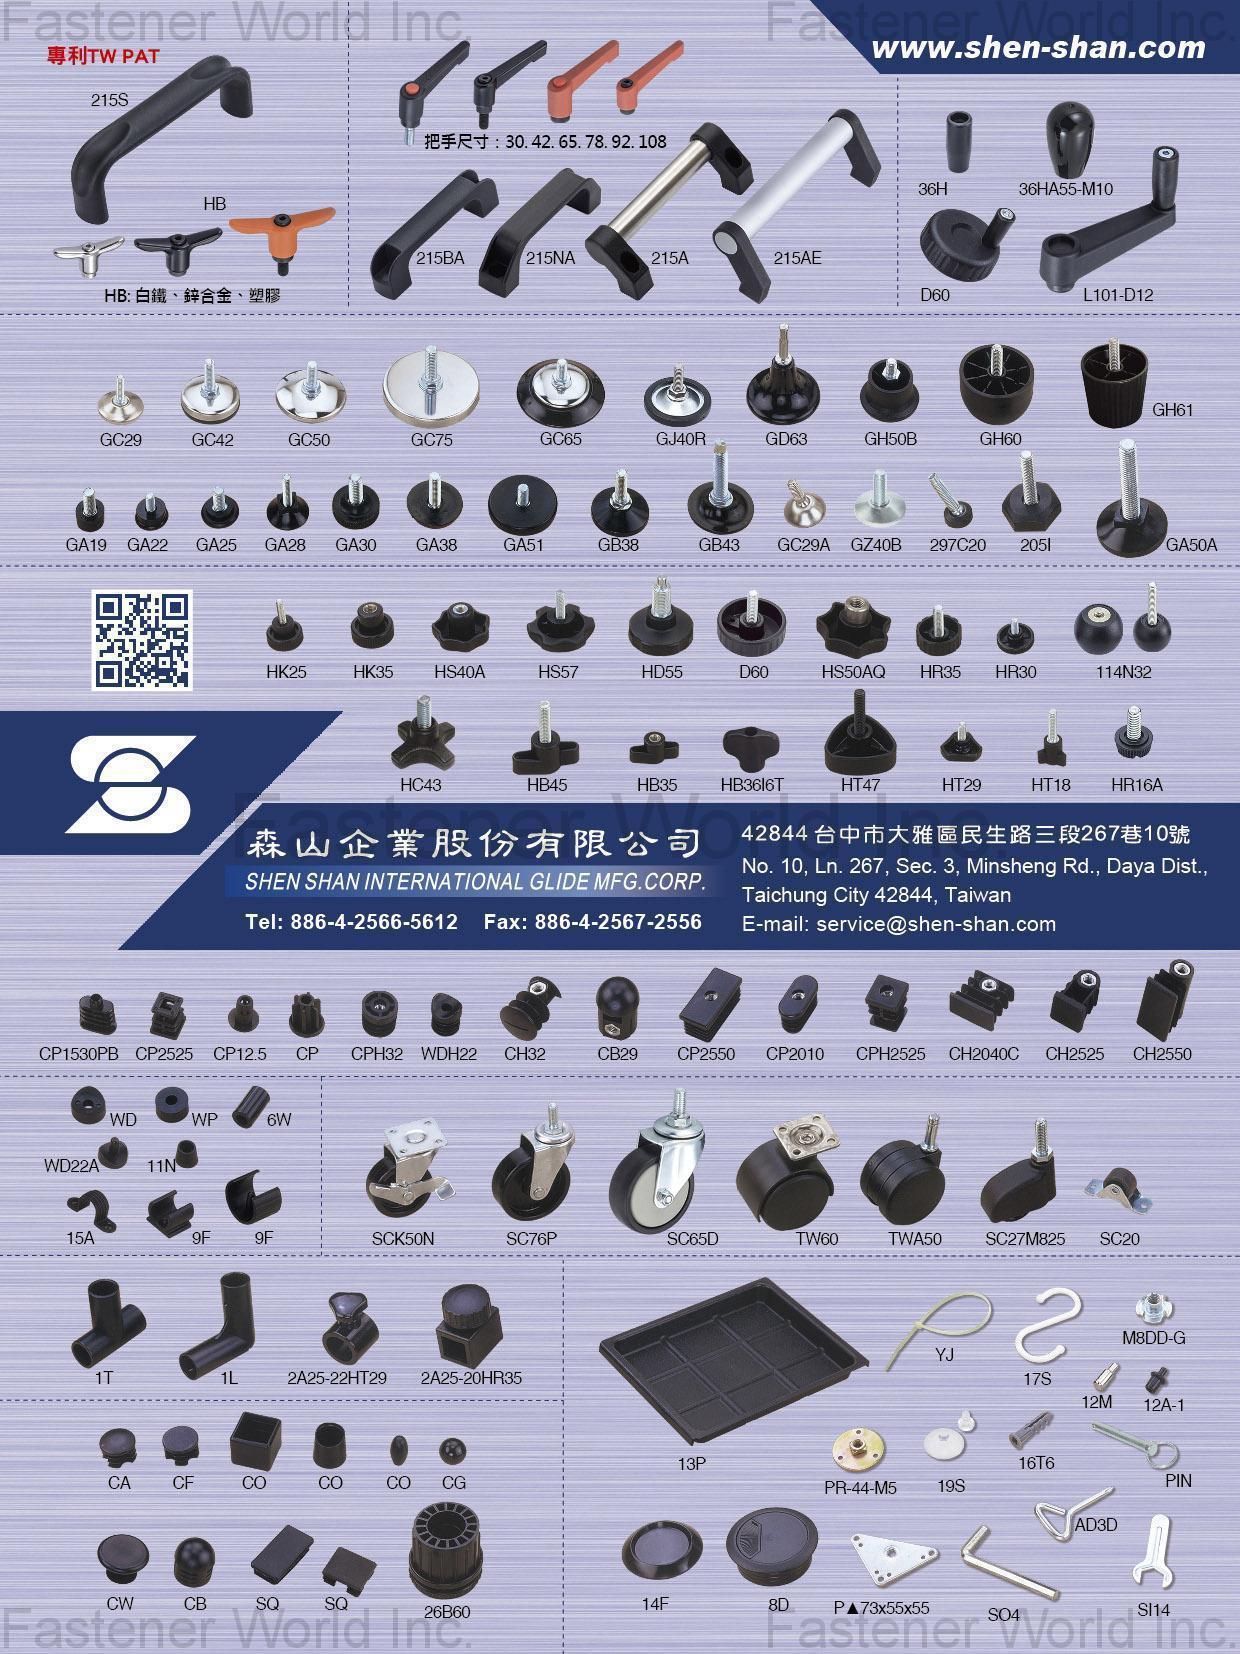 SHEN SHAN INTERNATIONAL GLIDE MFG. CORP. , Handle, Indexing Plunger, Knob, Glide, Threaded Tube Inserts, Tube Insert / End Cap, Caster, Hose Clamp, Angle-joint, Fix Clip, C Shape Glides, Nail Glide, Clip Saddle, Washer, Hardware, S-Hook, Cable Tie, Pin, Wrench, Office Desk Cable Hole, Draining Board, Wall Plug, Plastic Sucker, Caster Plate